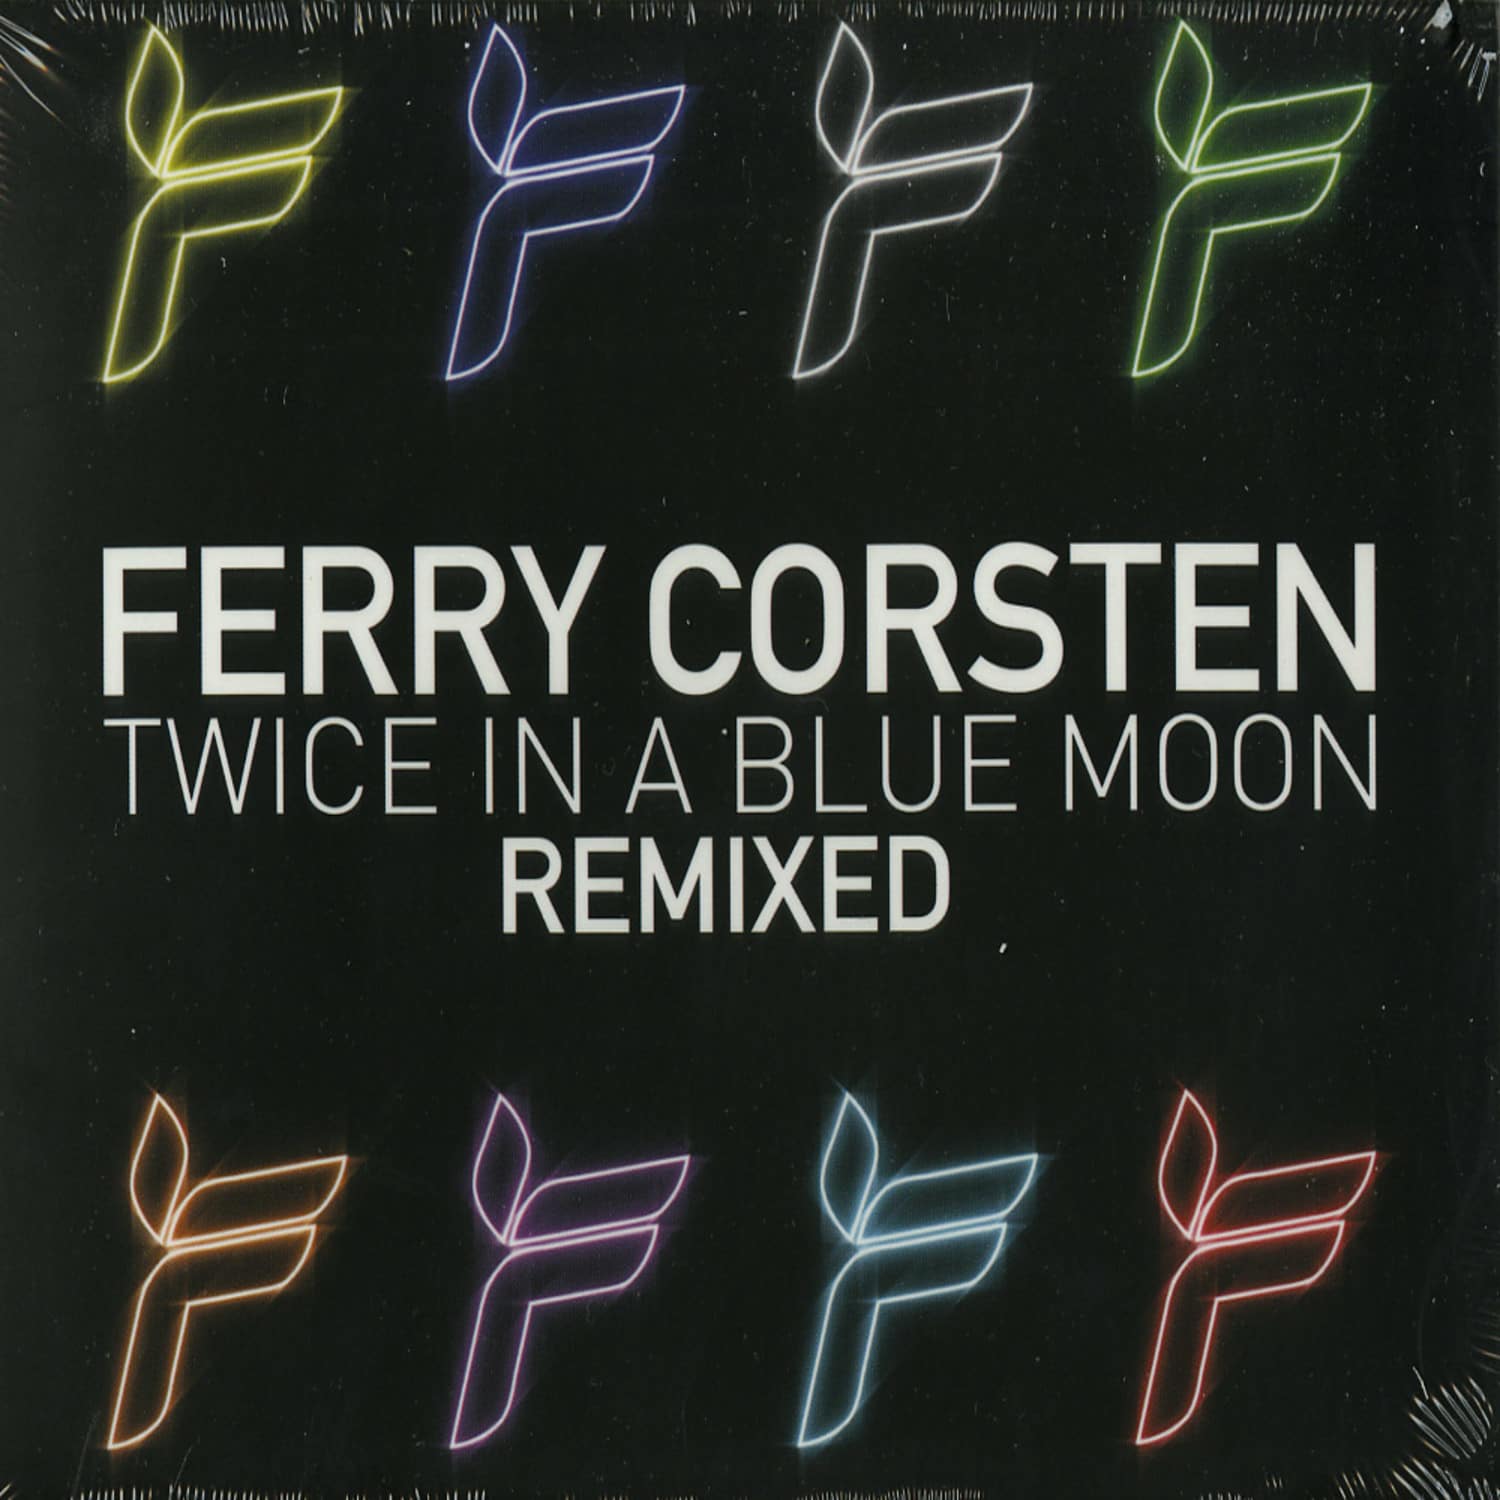 Ferry Corsten - TWICE IN A BLUE MOON REMIXED 